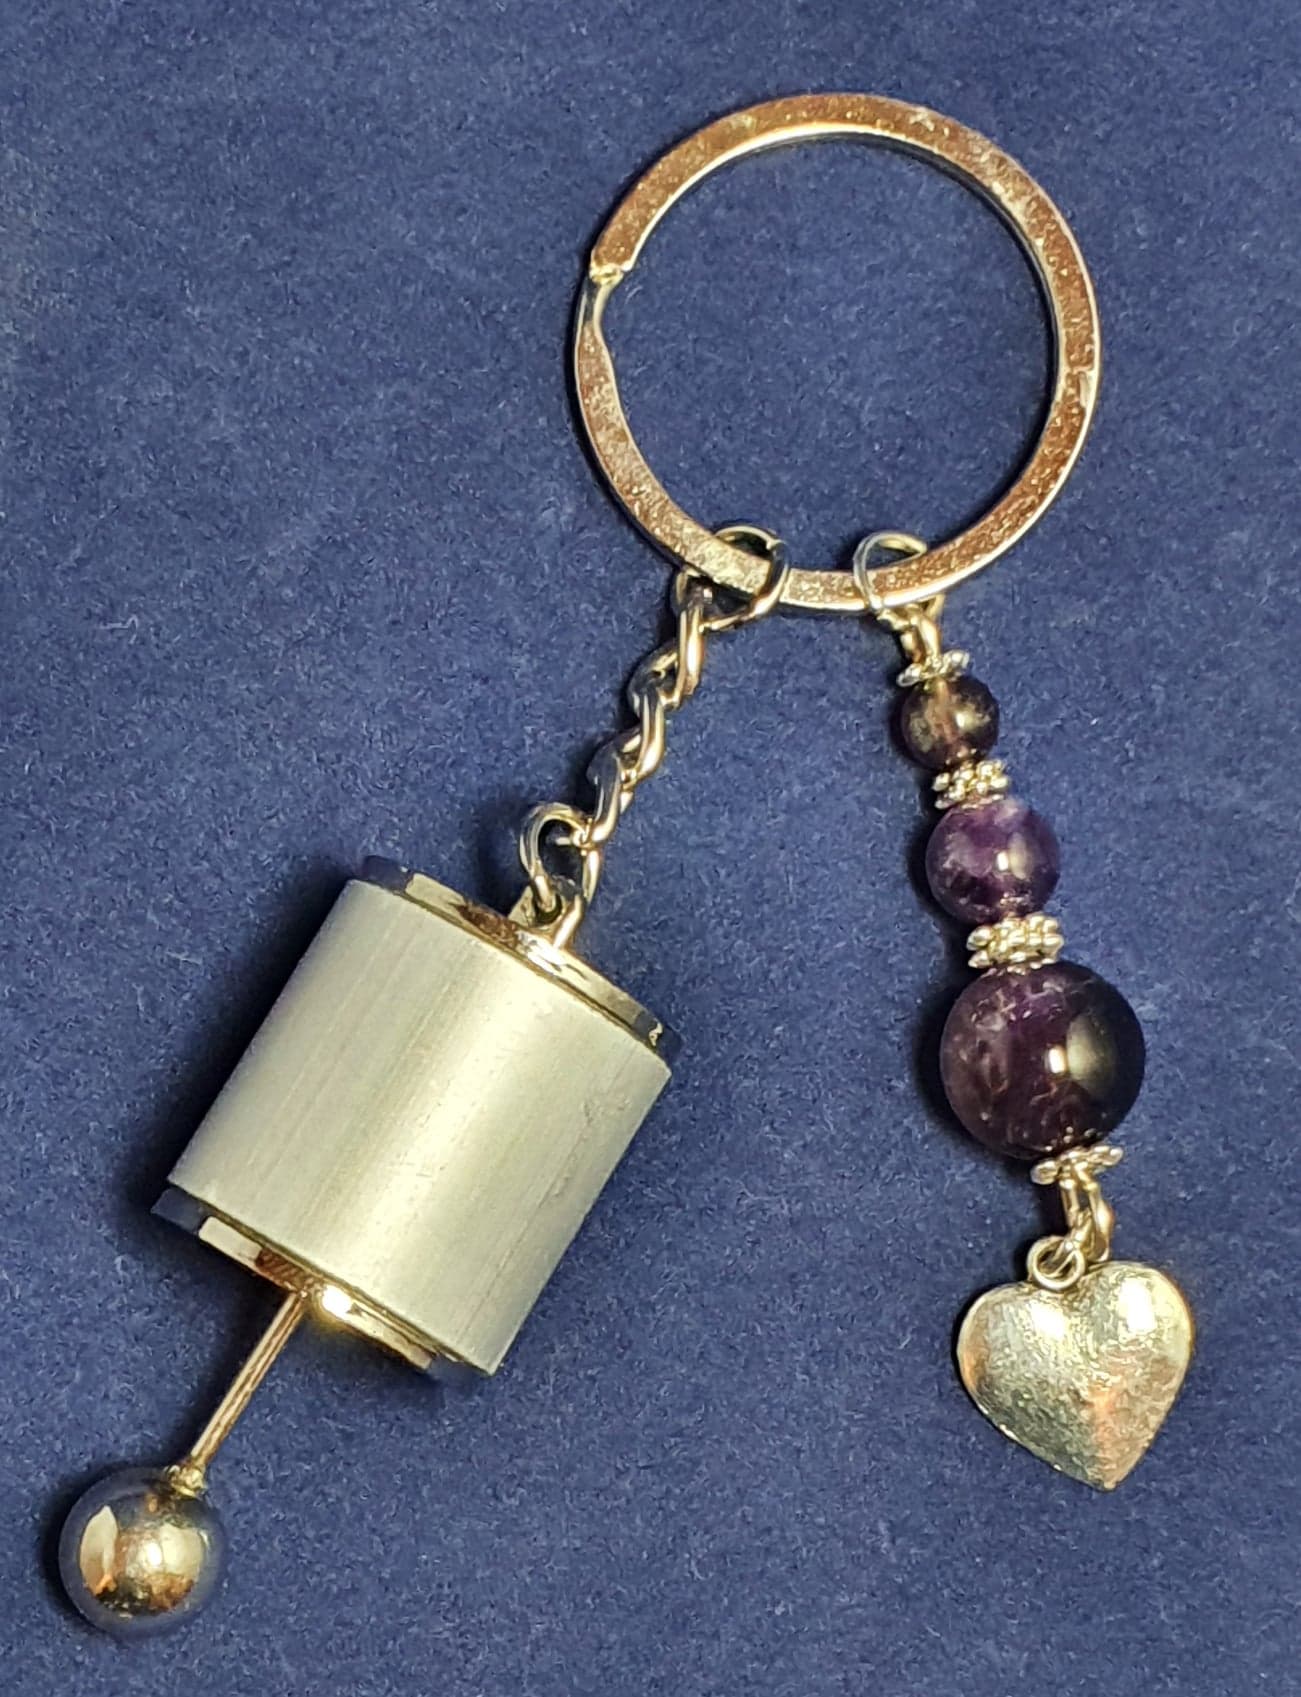 Novelty Gear stick Key ring with Amethyst